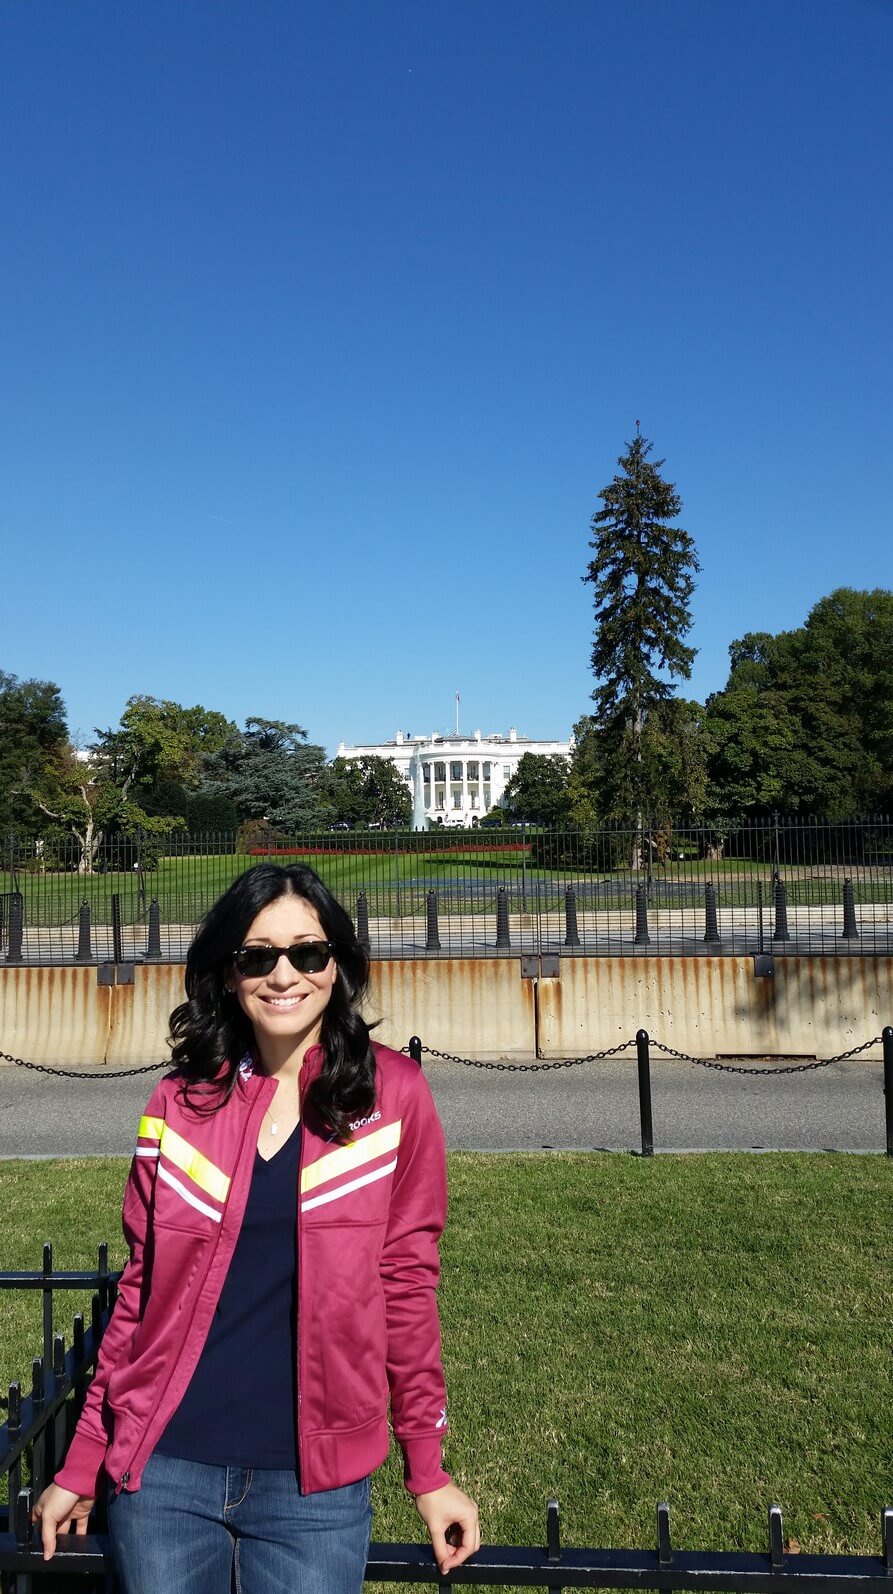 Oh just strolling by the White House--nbd.